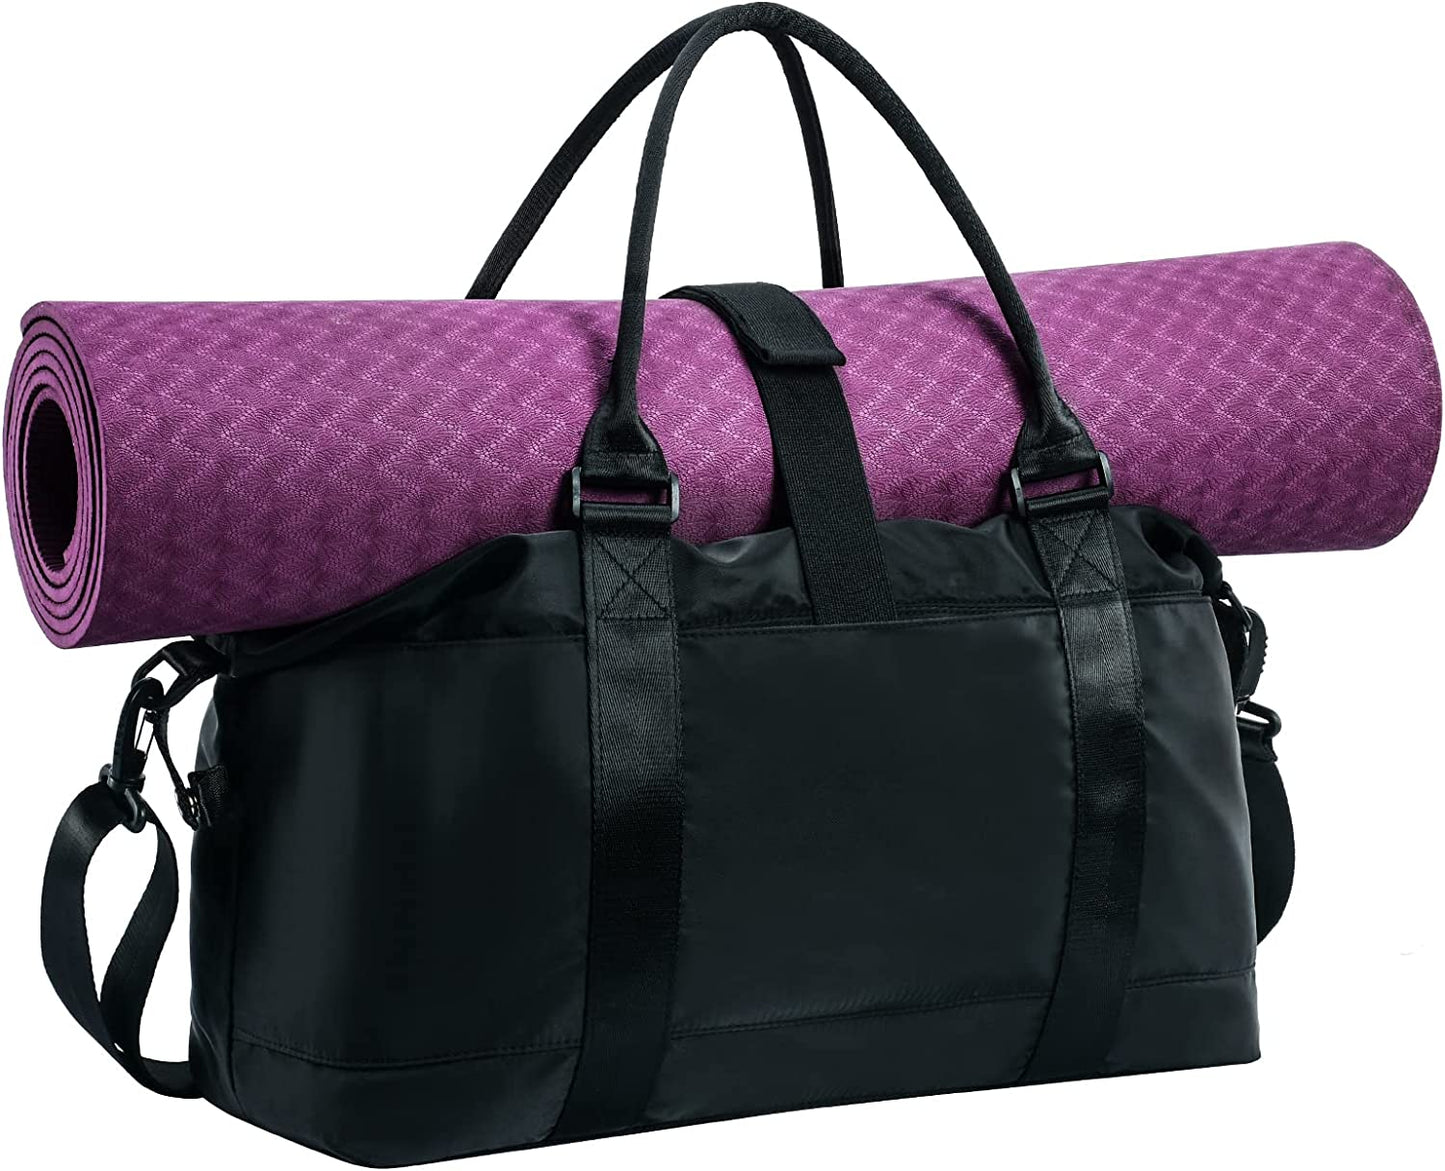 Women Travel Bags Carry On Weekender Bag,Gym Duffle Bag with Yoga Mat Buckle Black